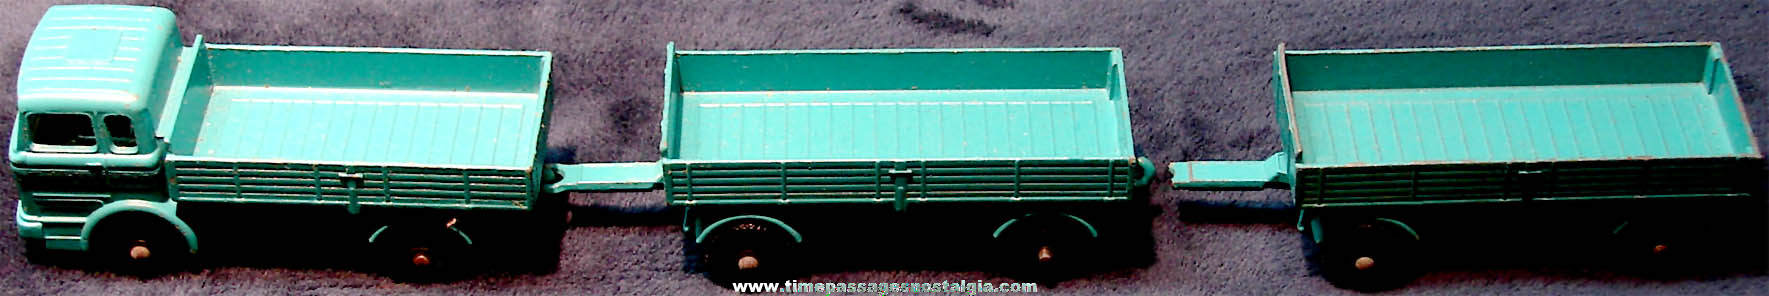 Old Lesney Matchbox Series No. 1 Miniature Diecast Toy Mercedes Truck & (2) Series No. 2 Mercedes Trailers